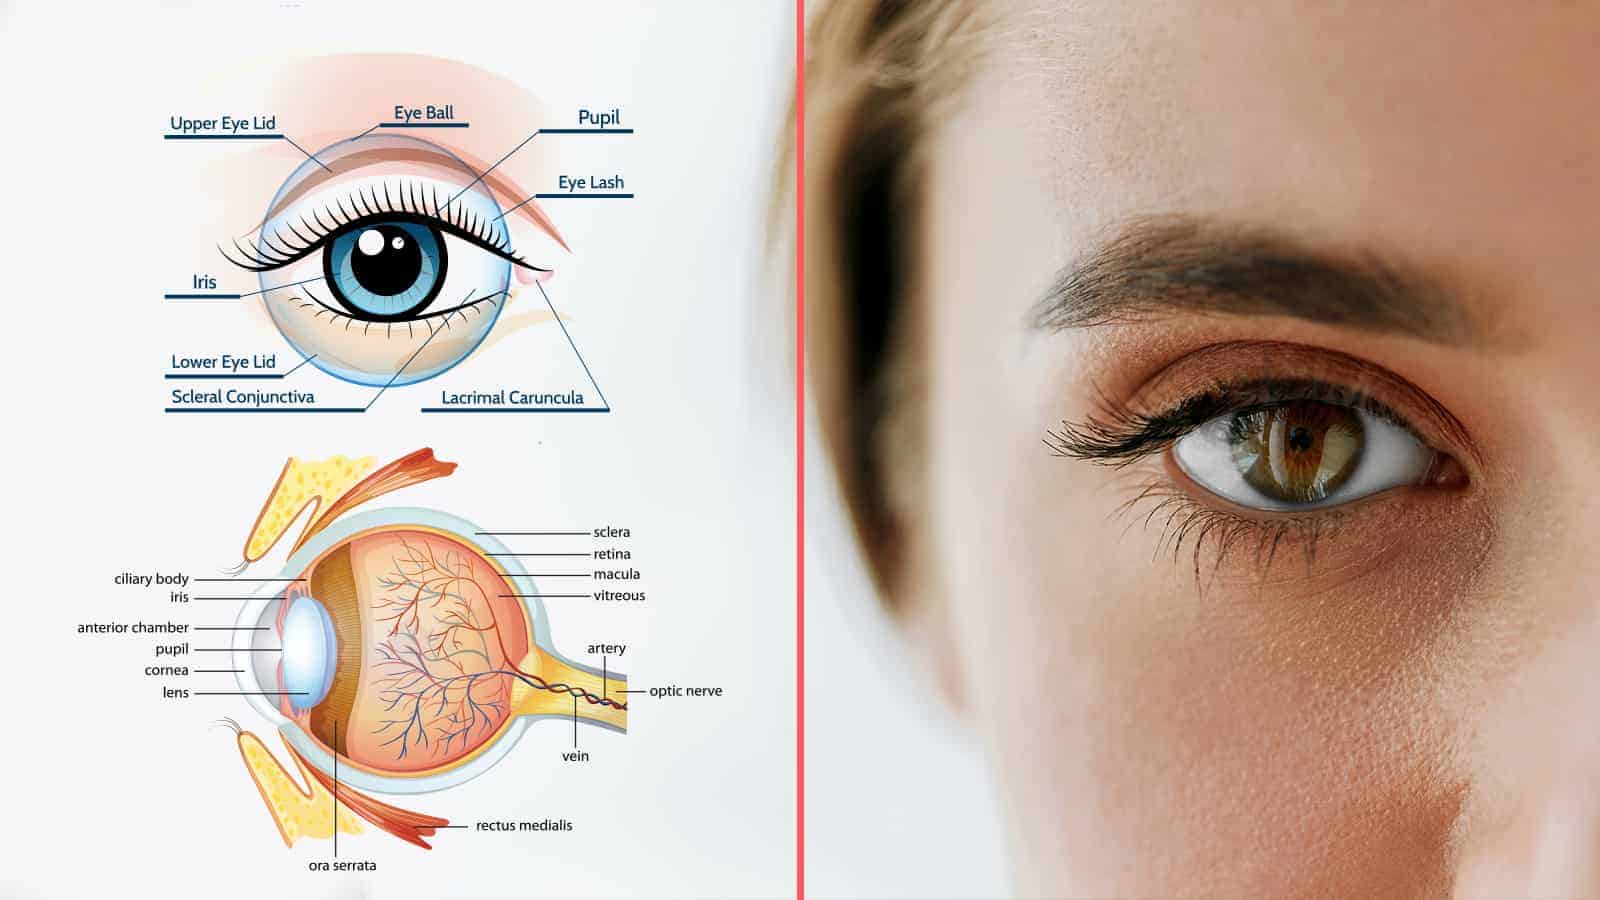 Doctors Explain That Poor Vision Reveals These 9 Health Issues